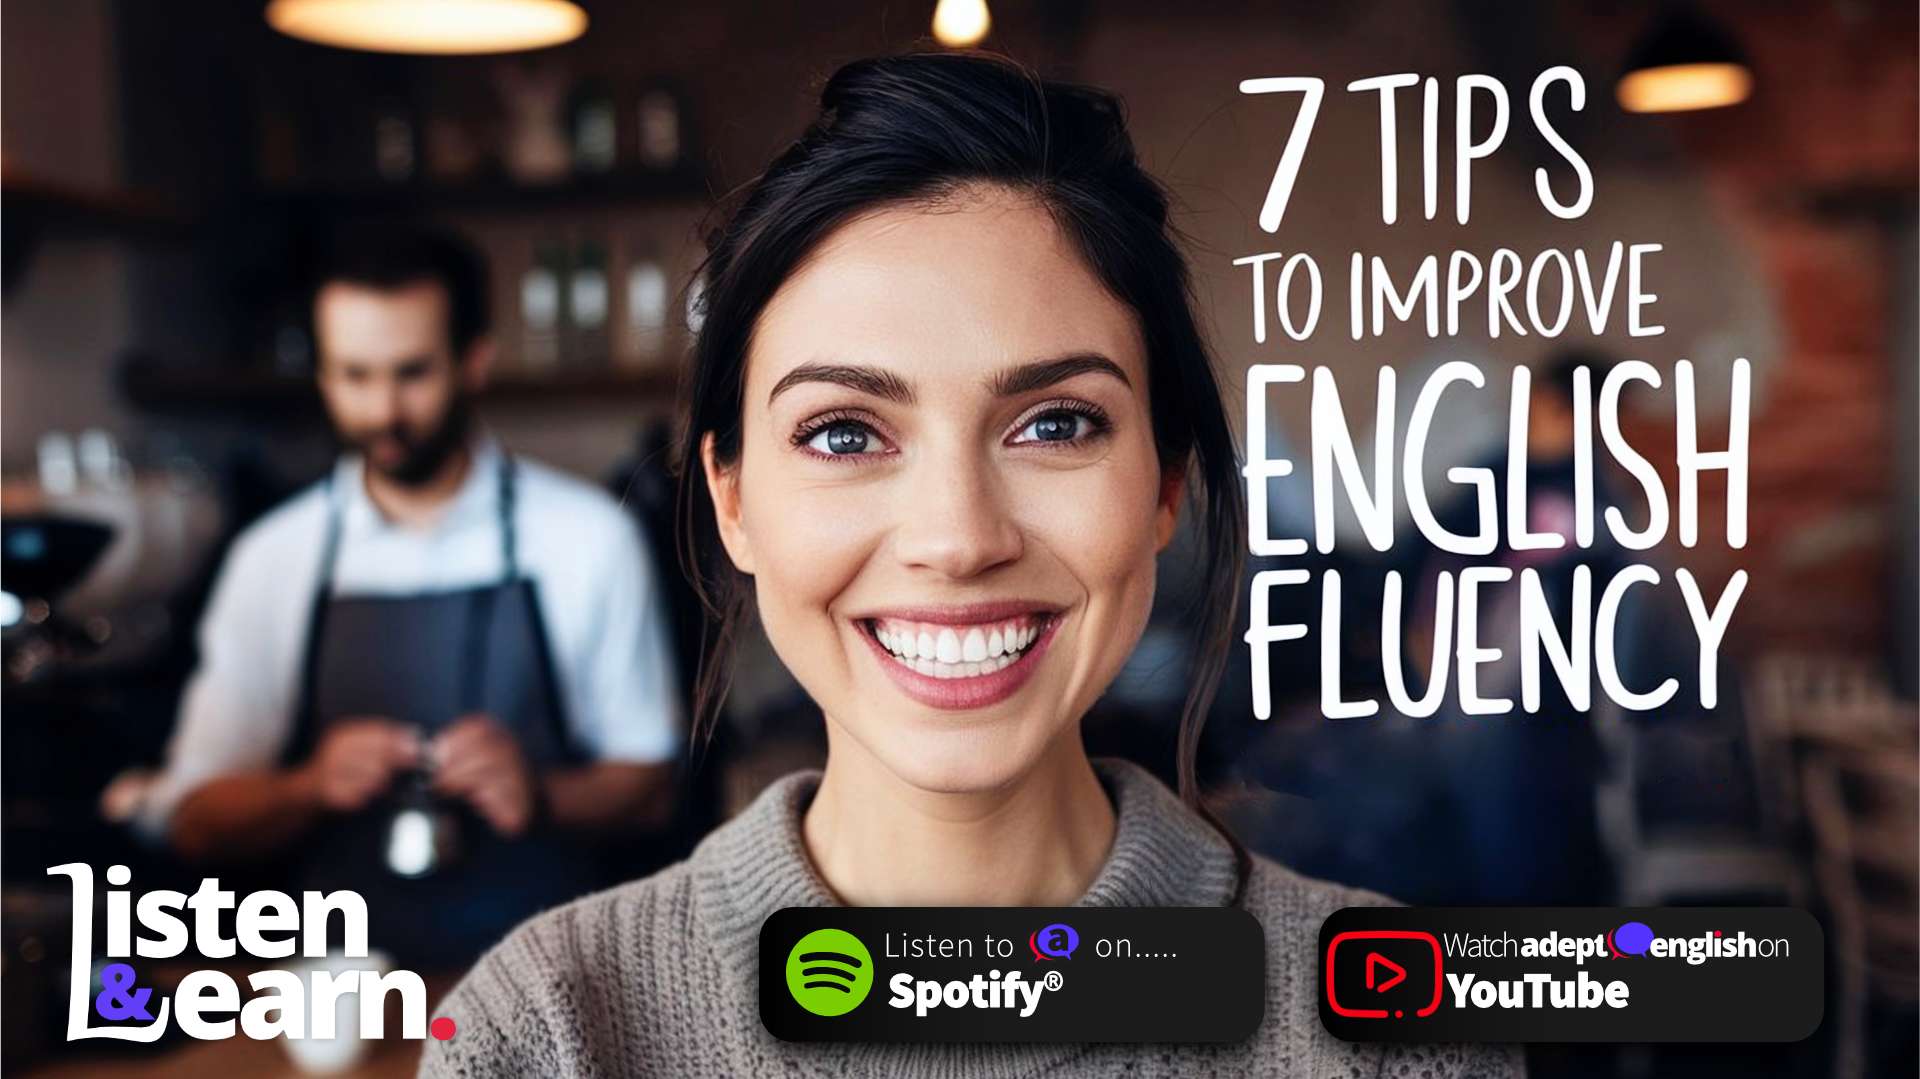 Get 7 easy tips to speak English more confidently - start using them today. A smiling lady in a coffee shop.